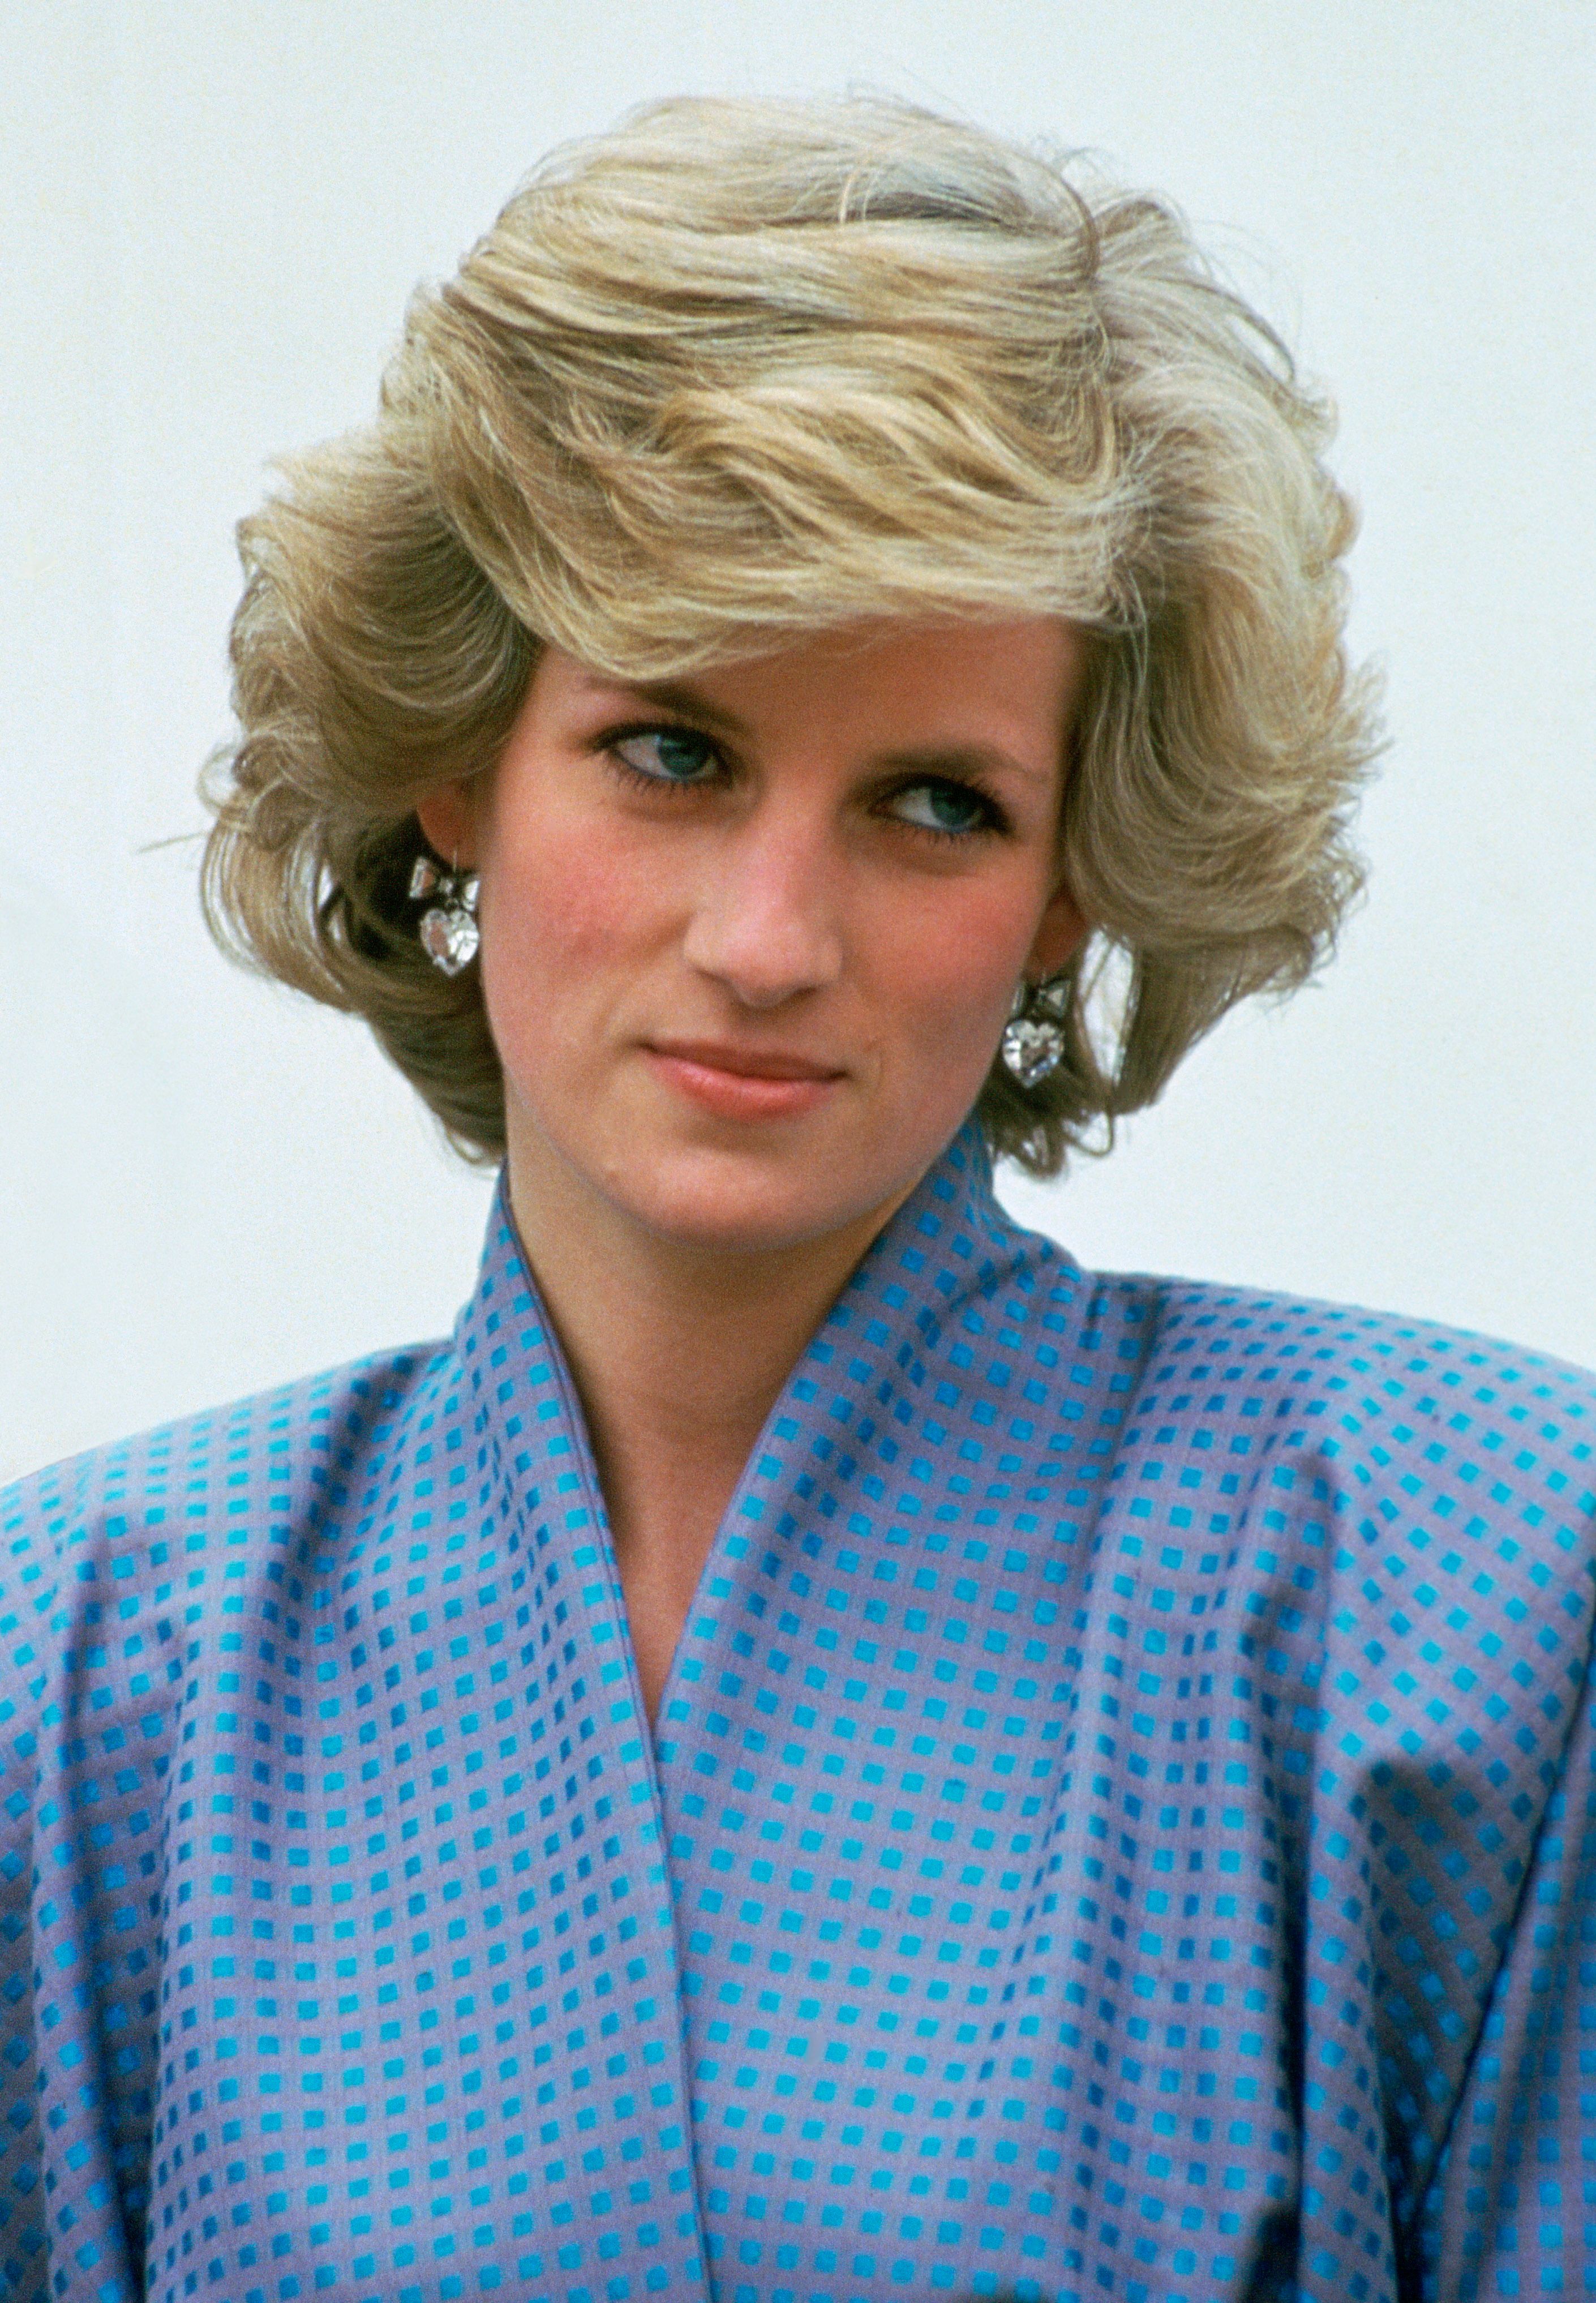 Princess Diana on an official overseas visit to Italy on April 22, 1985 | Source: Getty Images